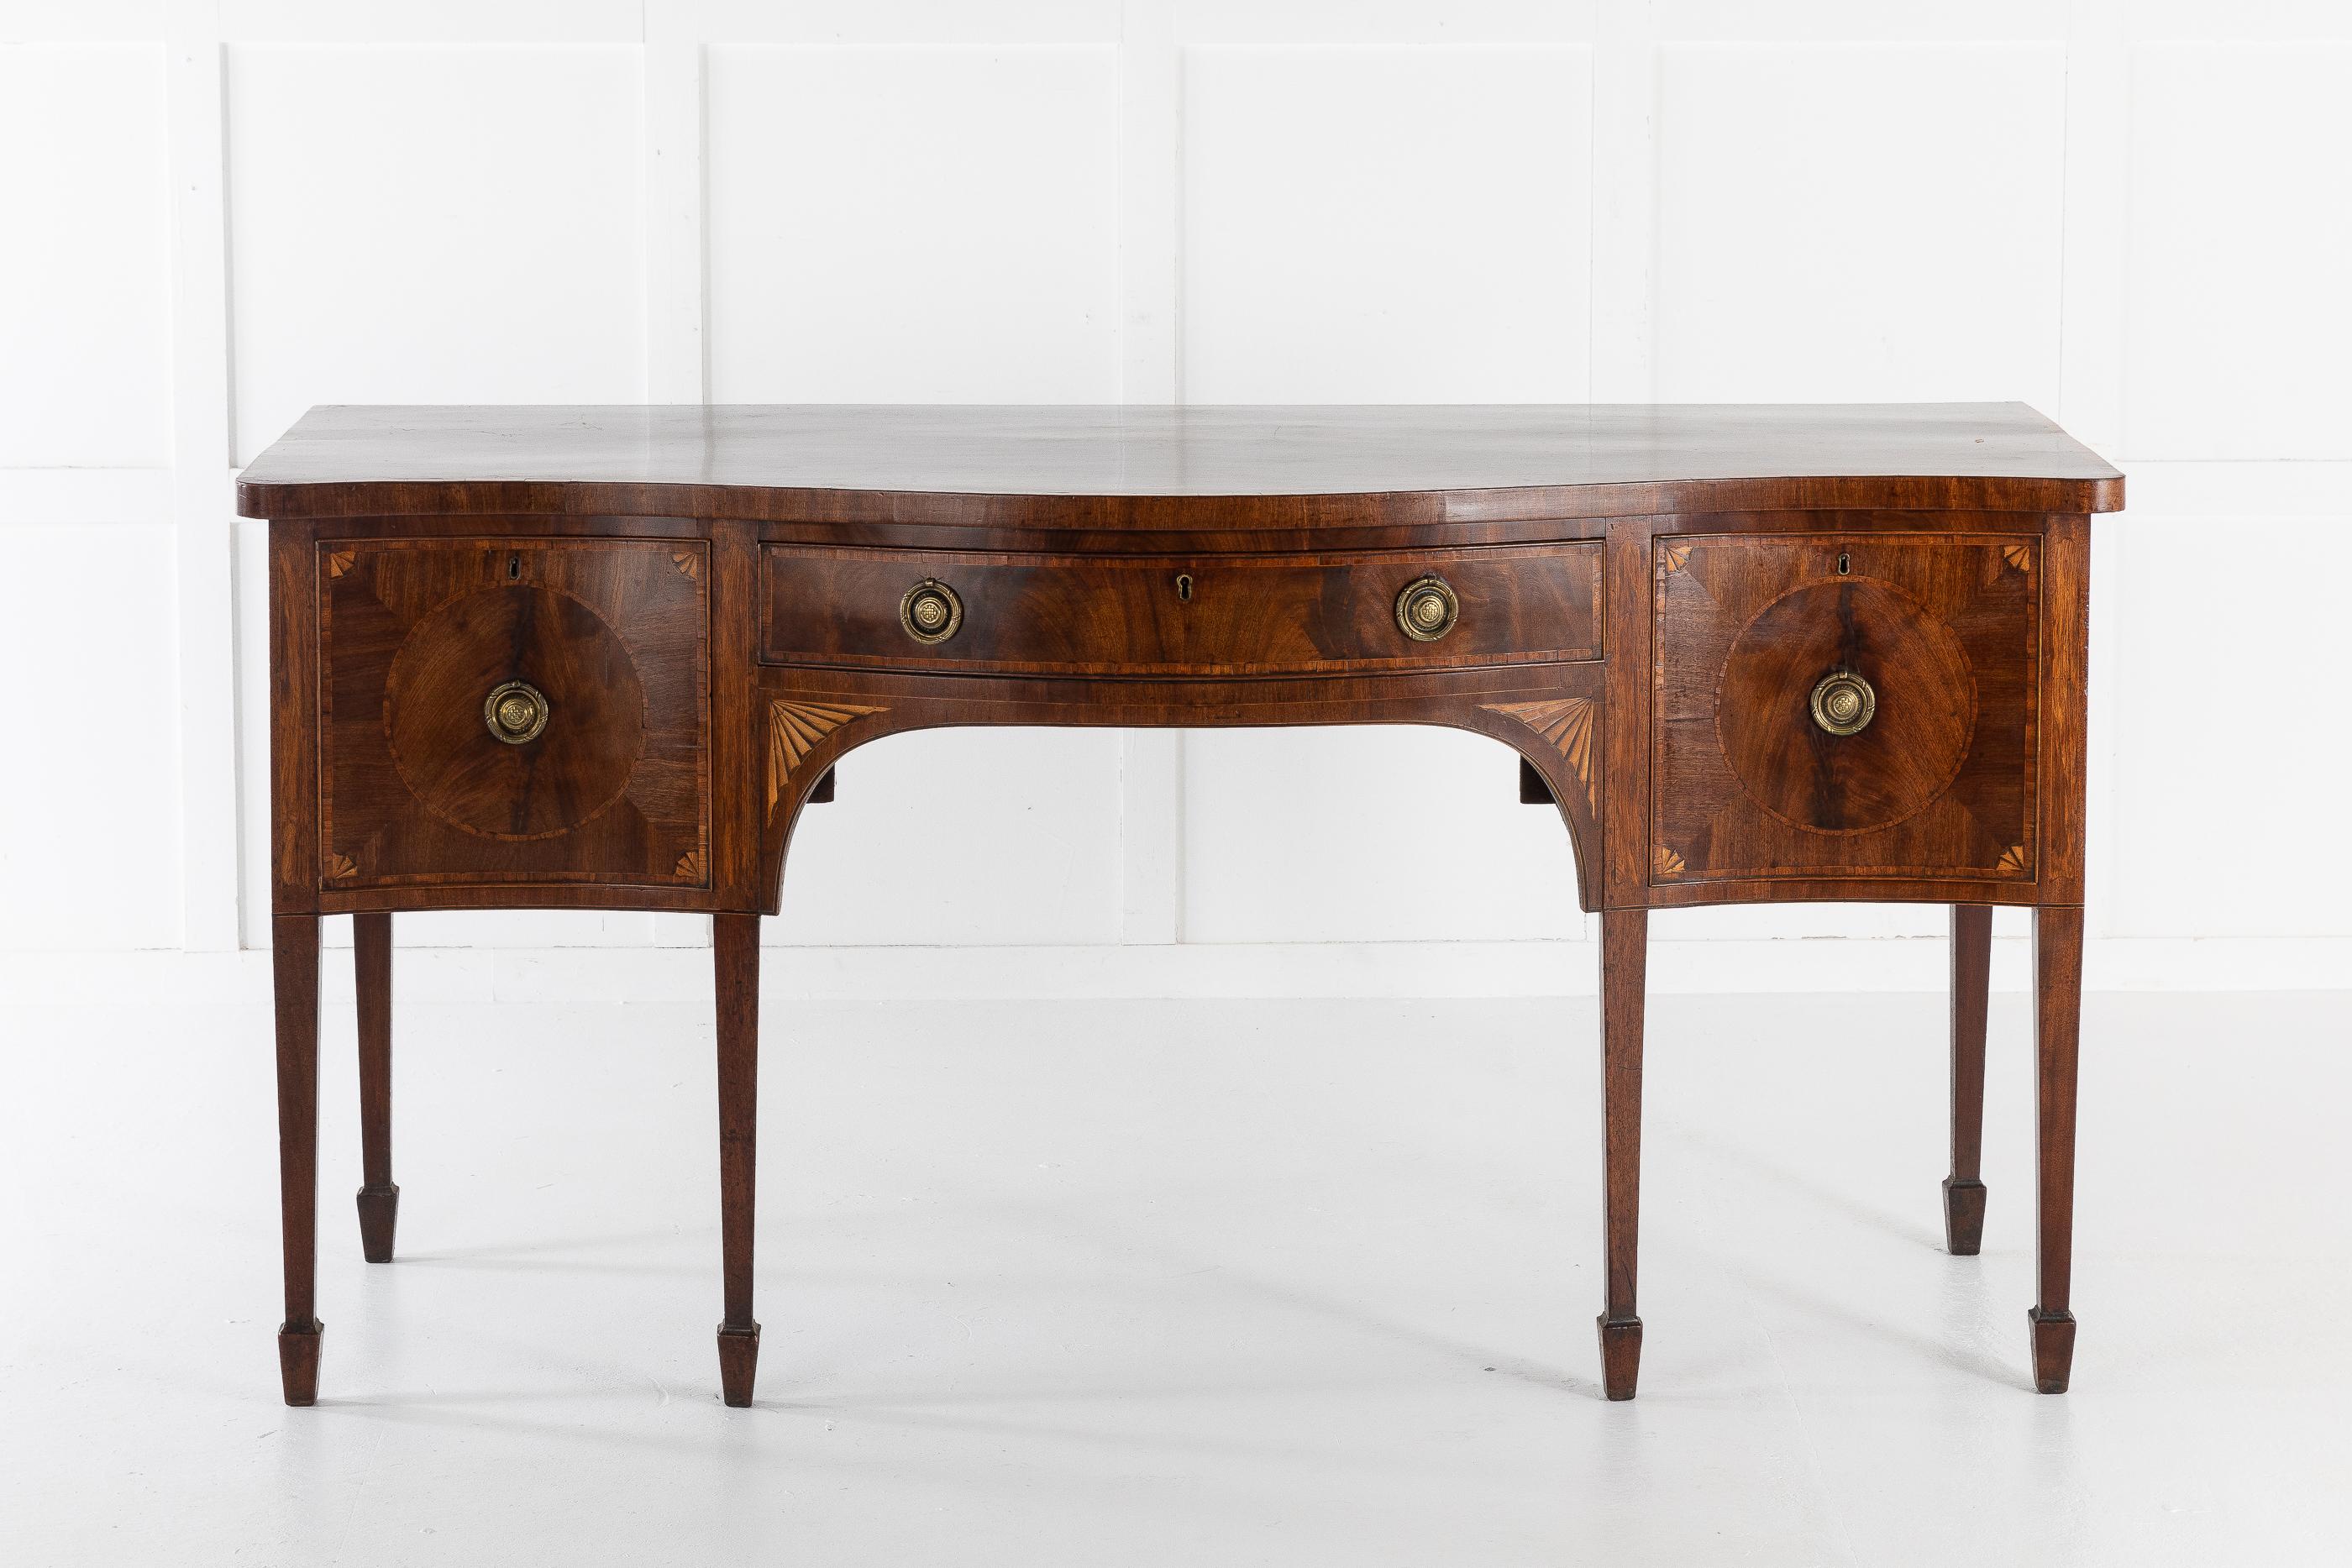 18th century George III mahogany inlaid and cross banded, serpentine front sideboard, on square tapering legs and spade feet. Good original condition and color. Wonderful piece of mahogany veneer used for the top.